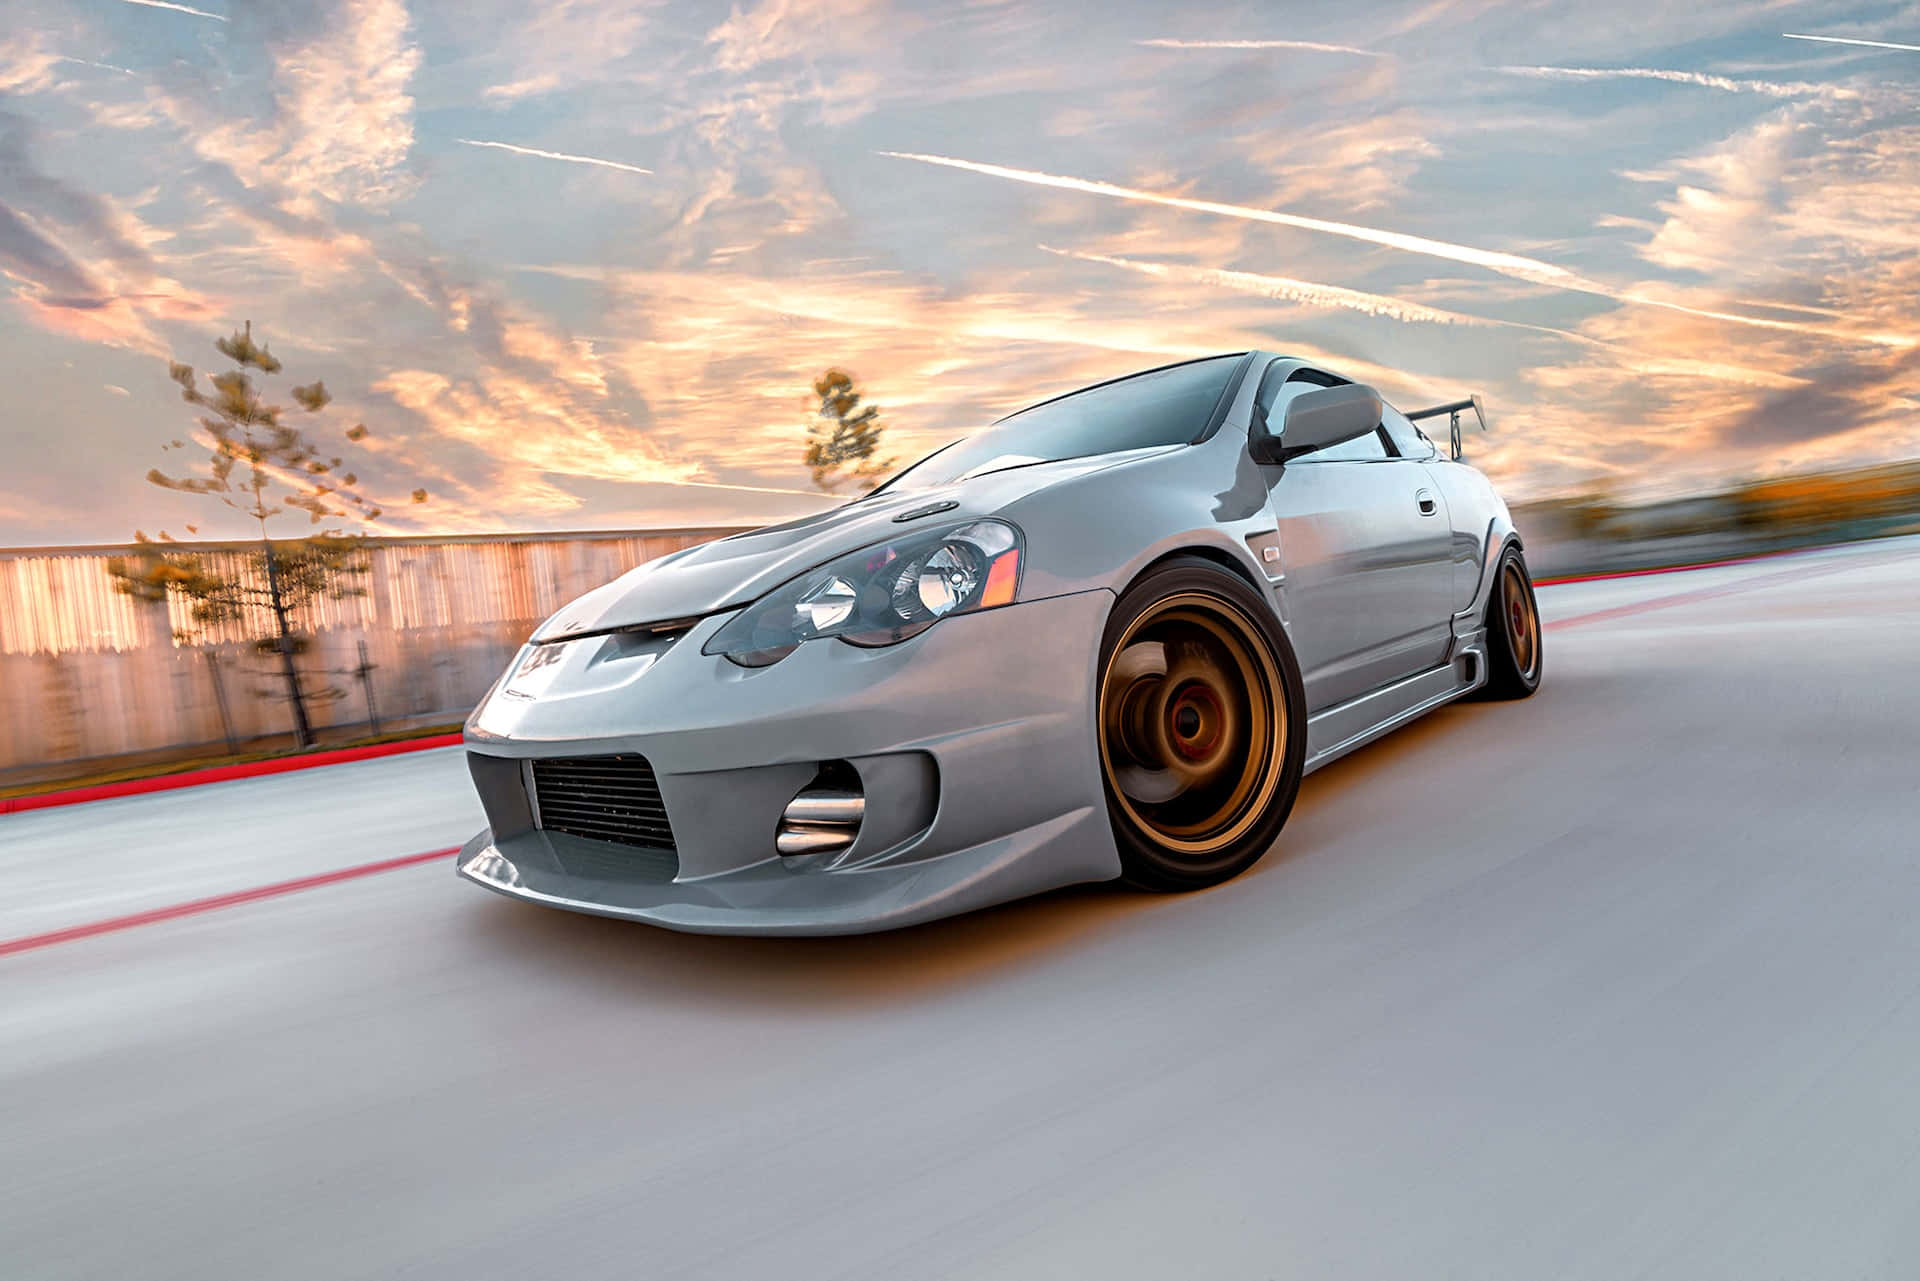 Stunning Acura RSX on the Road Wallpaper